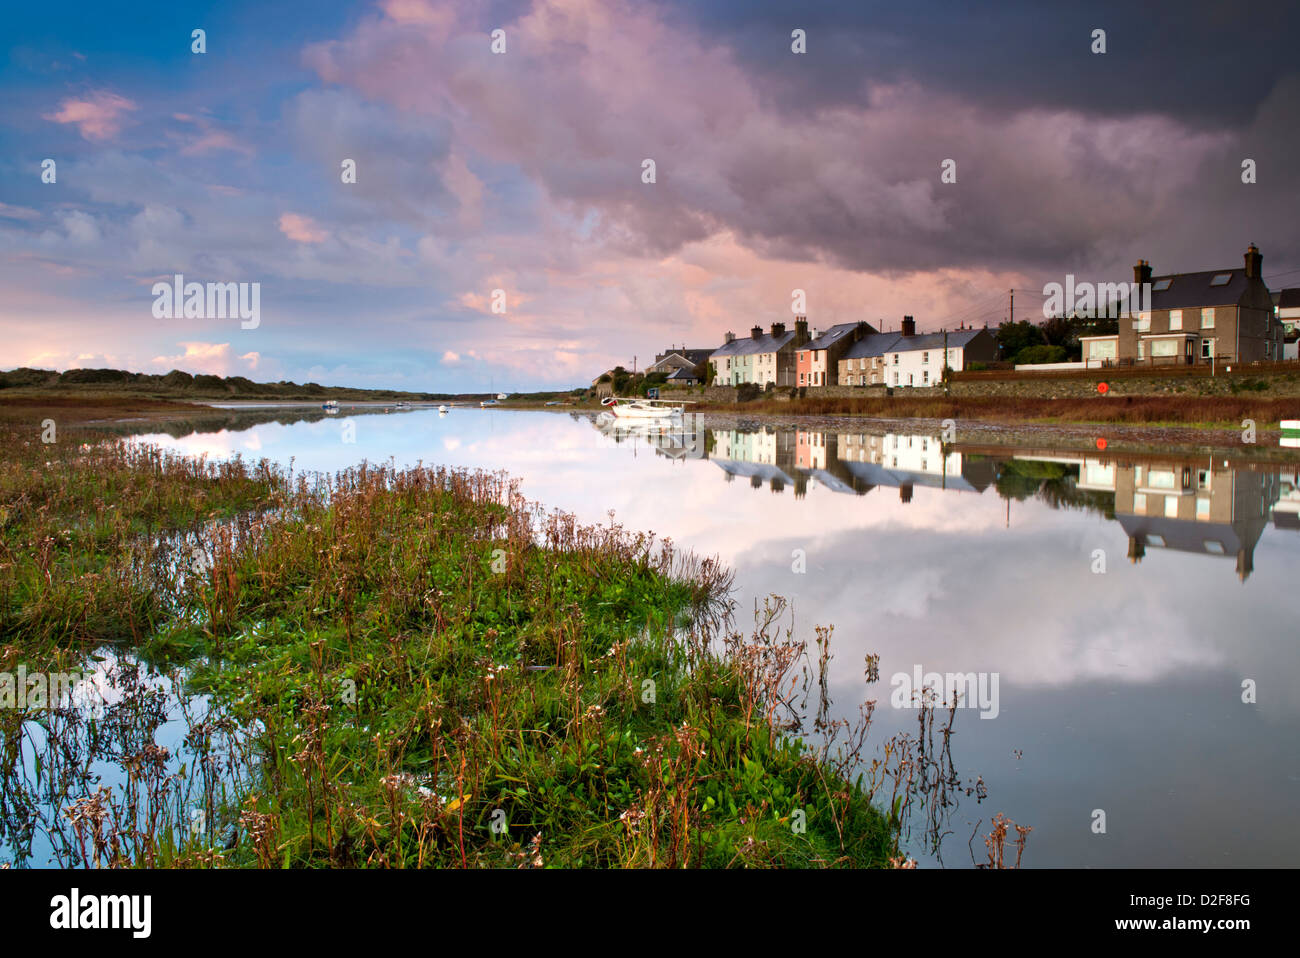 Storm Clouds Gather over Afon Ffraw & Riverside Cottages, Aberffraw, Anglesey, North Wales, UK Stock Photo